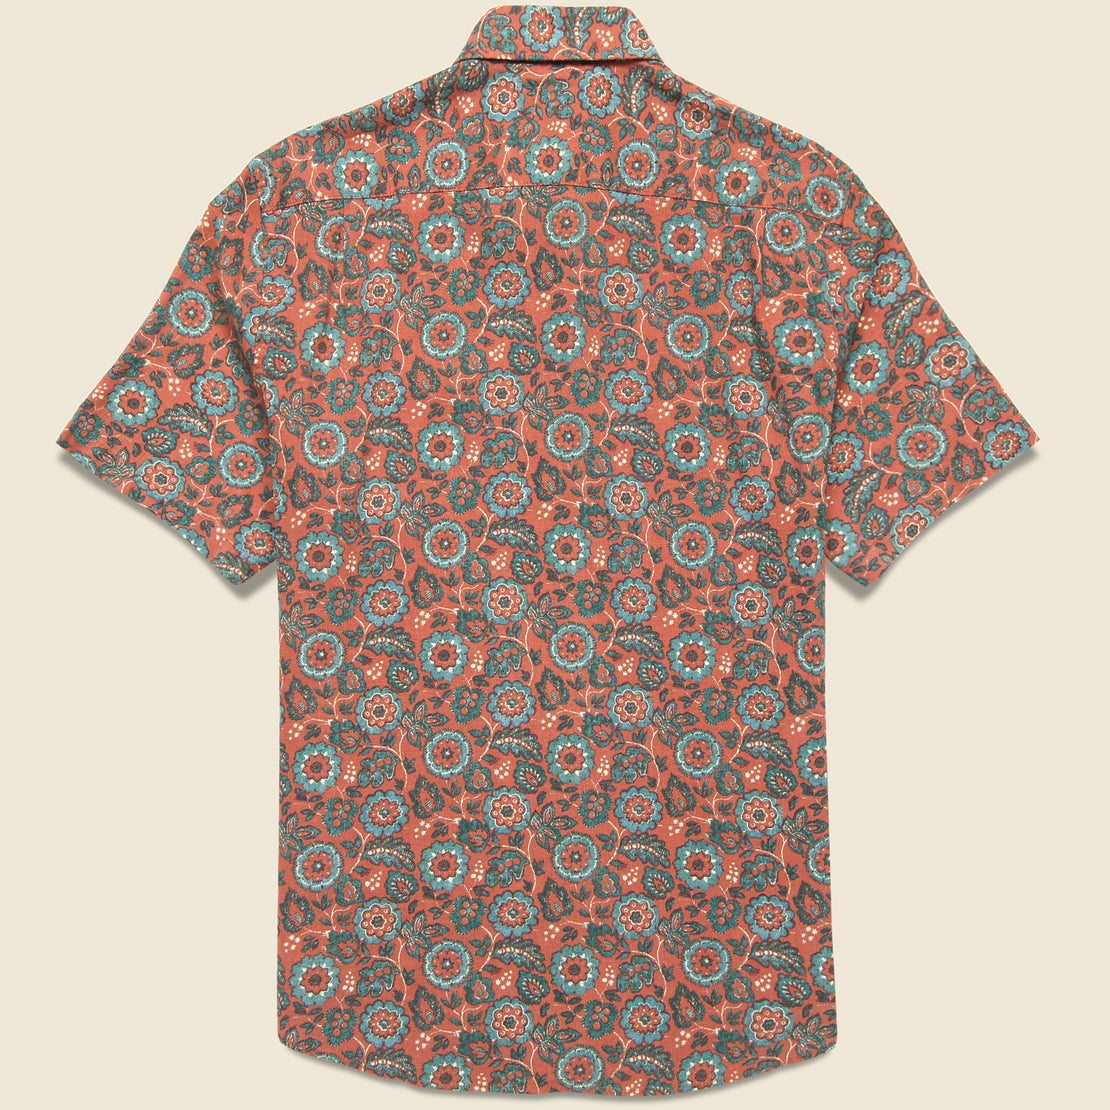 Breeze Shirt - Rose Turquoise Blossom - Faherty - STAG Provisions - Tops - S/S Woven - Floral